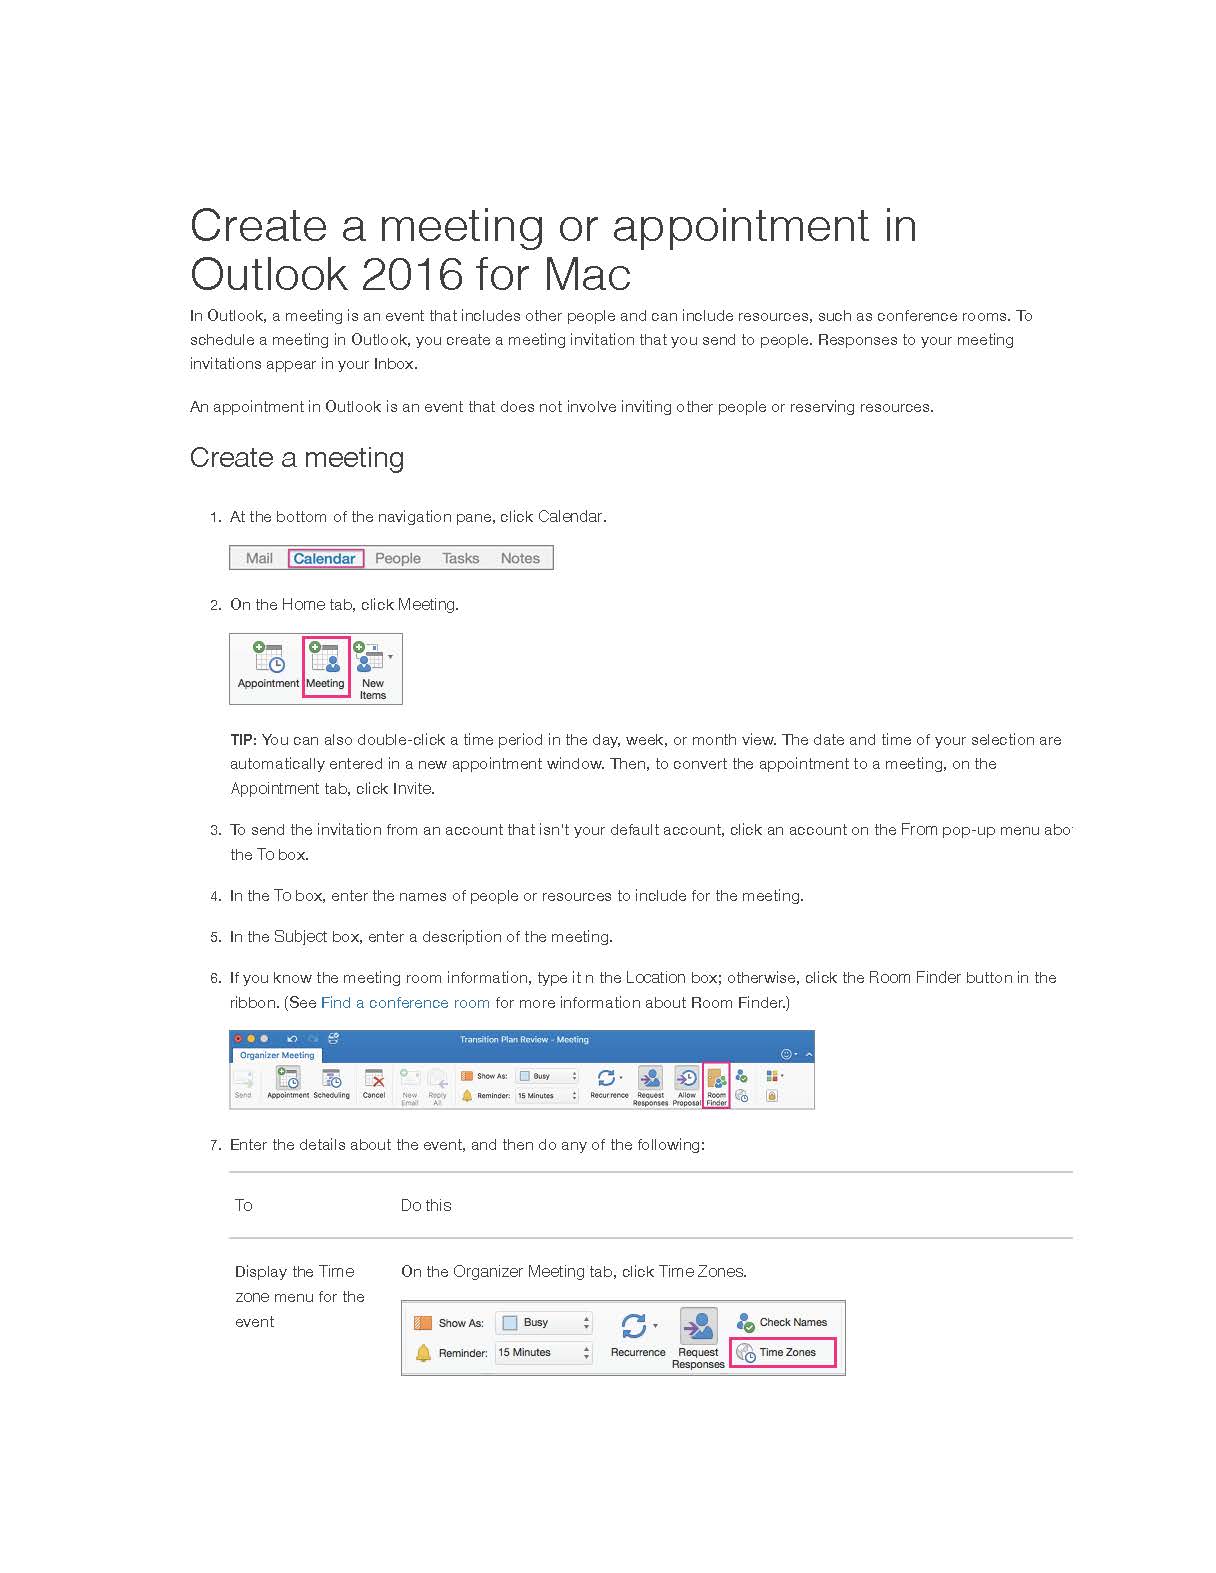 Create a Meeting or Appointment in Outlook 2016 for Mac